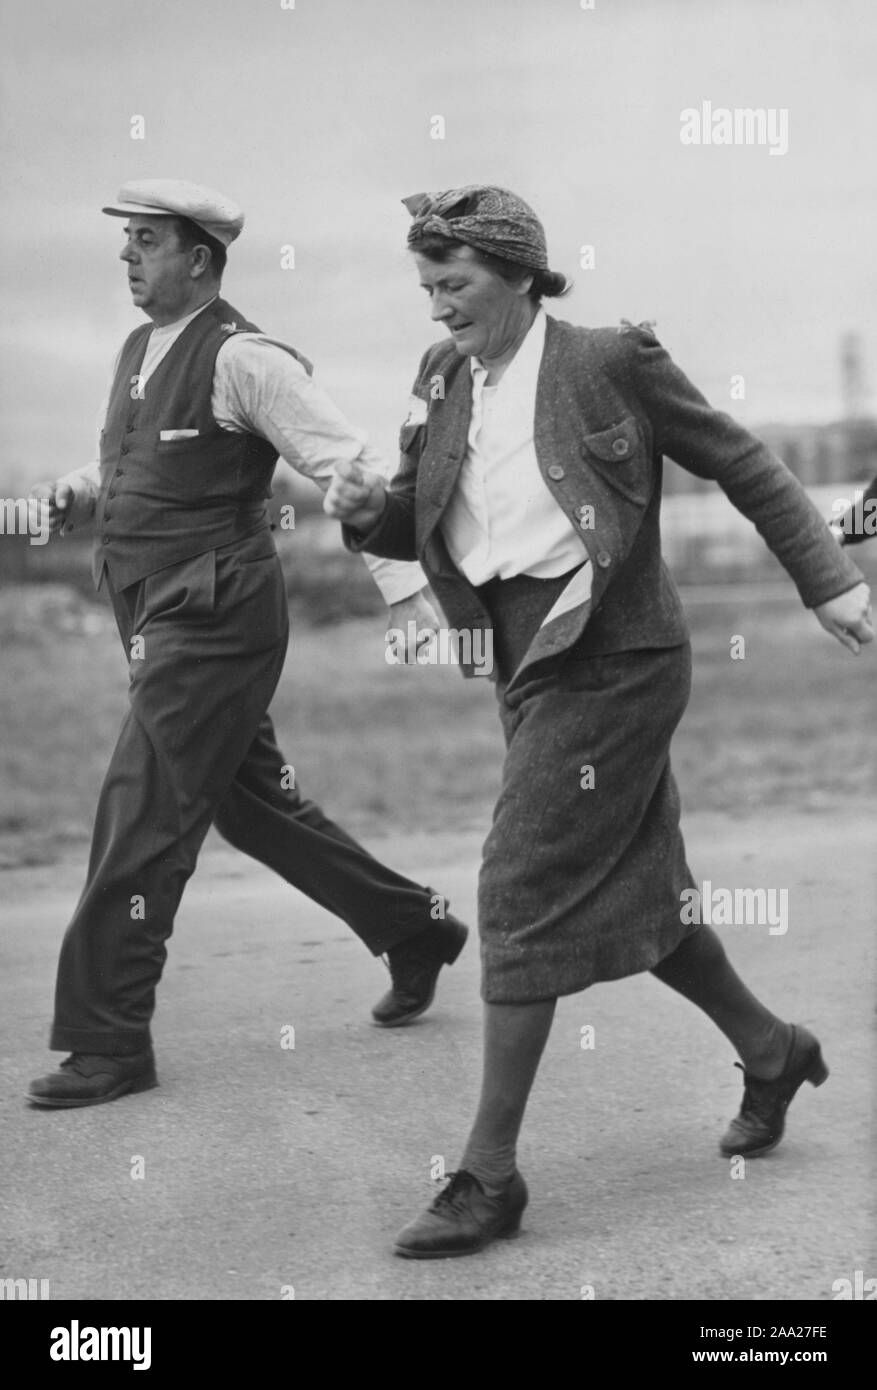 Keeping fit in the 1940s. Mrs. Hulda Skoglund is a swedish contestant in the competition between Sweden and Finland of the most people signing up and walking to promote physical activity. Finland won with 1,5 million people walking. Sweden 1941 Stock Photo